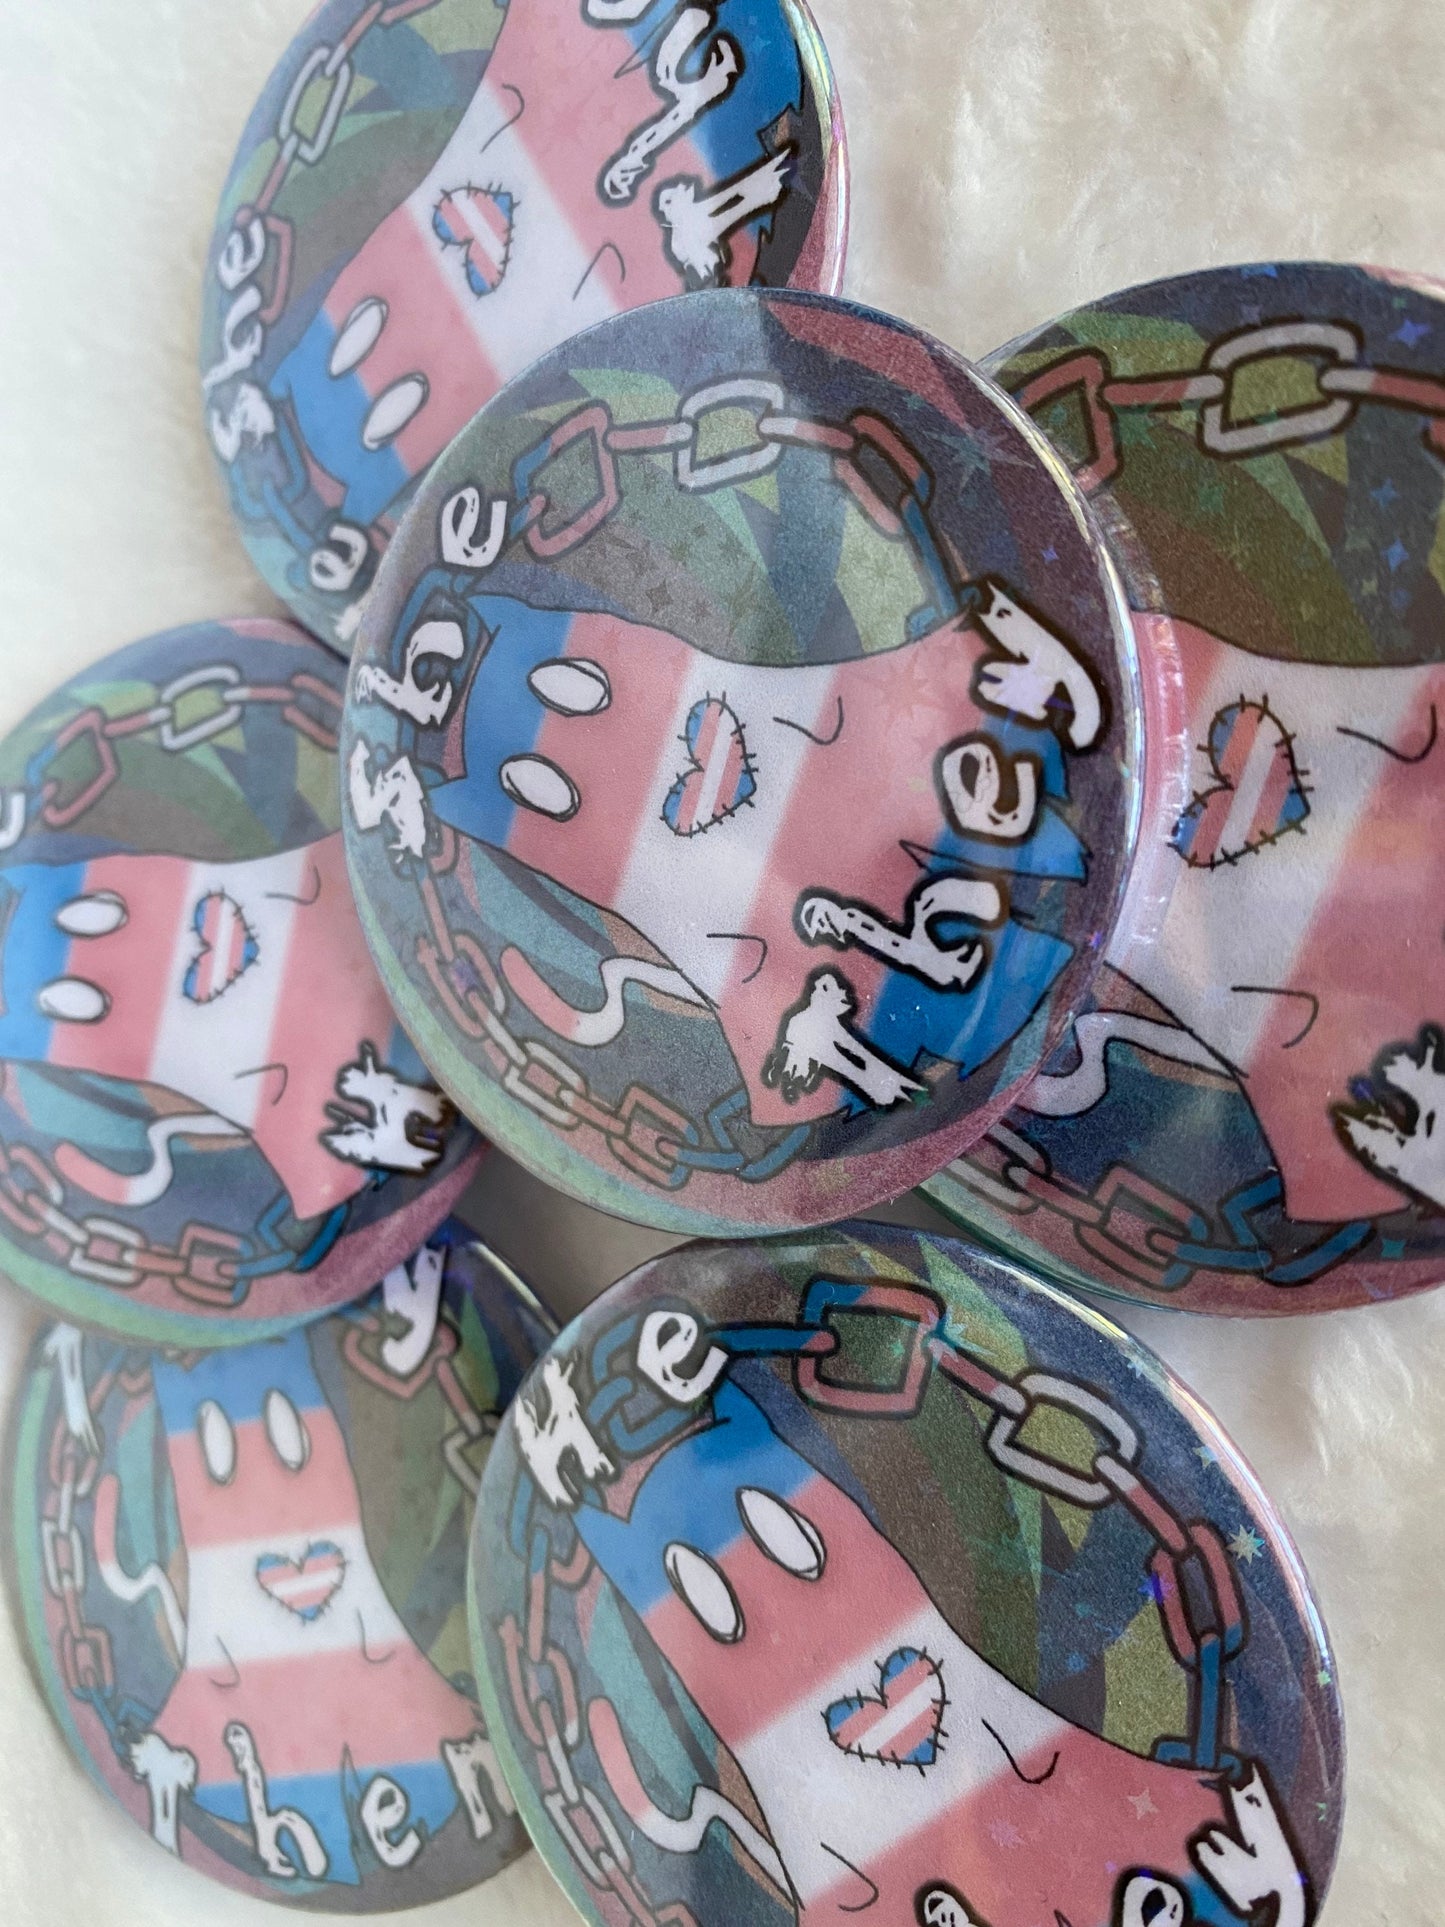 Pronoun Pin Back Buttons | Trans Ghost Cat Holographic Star button